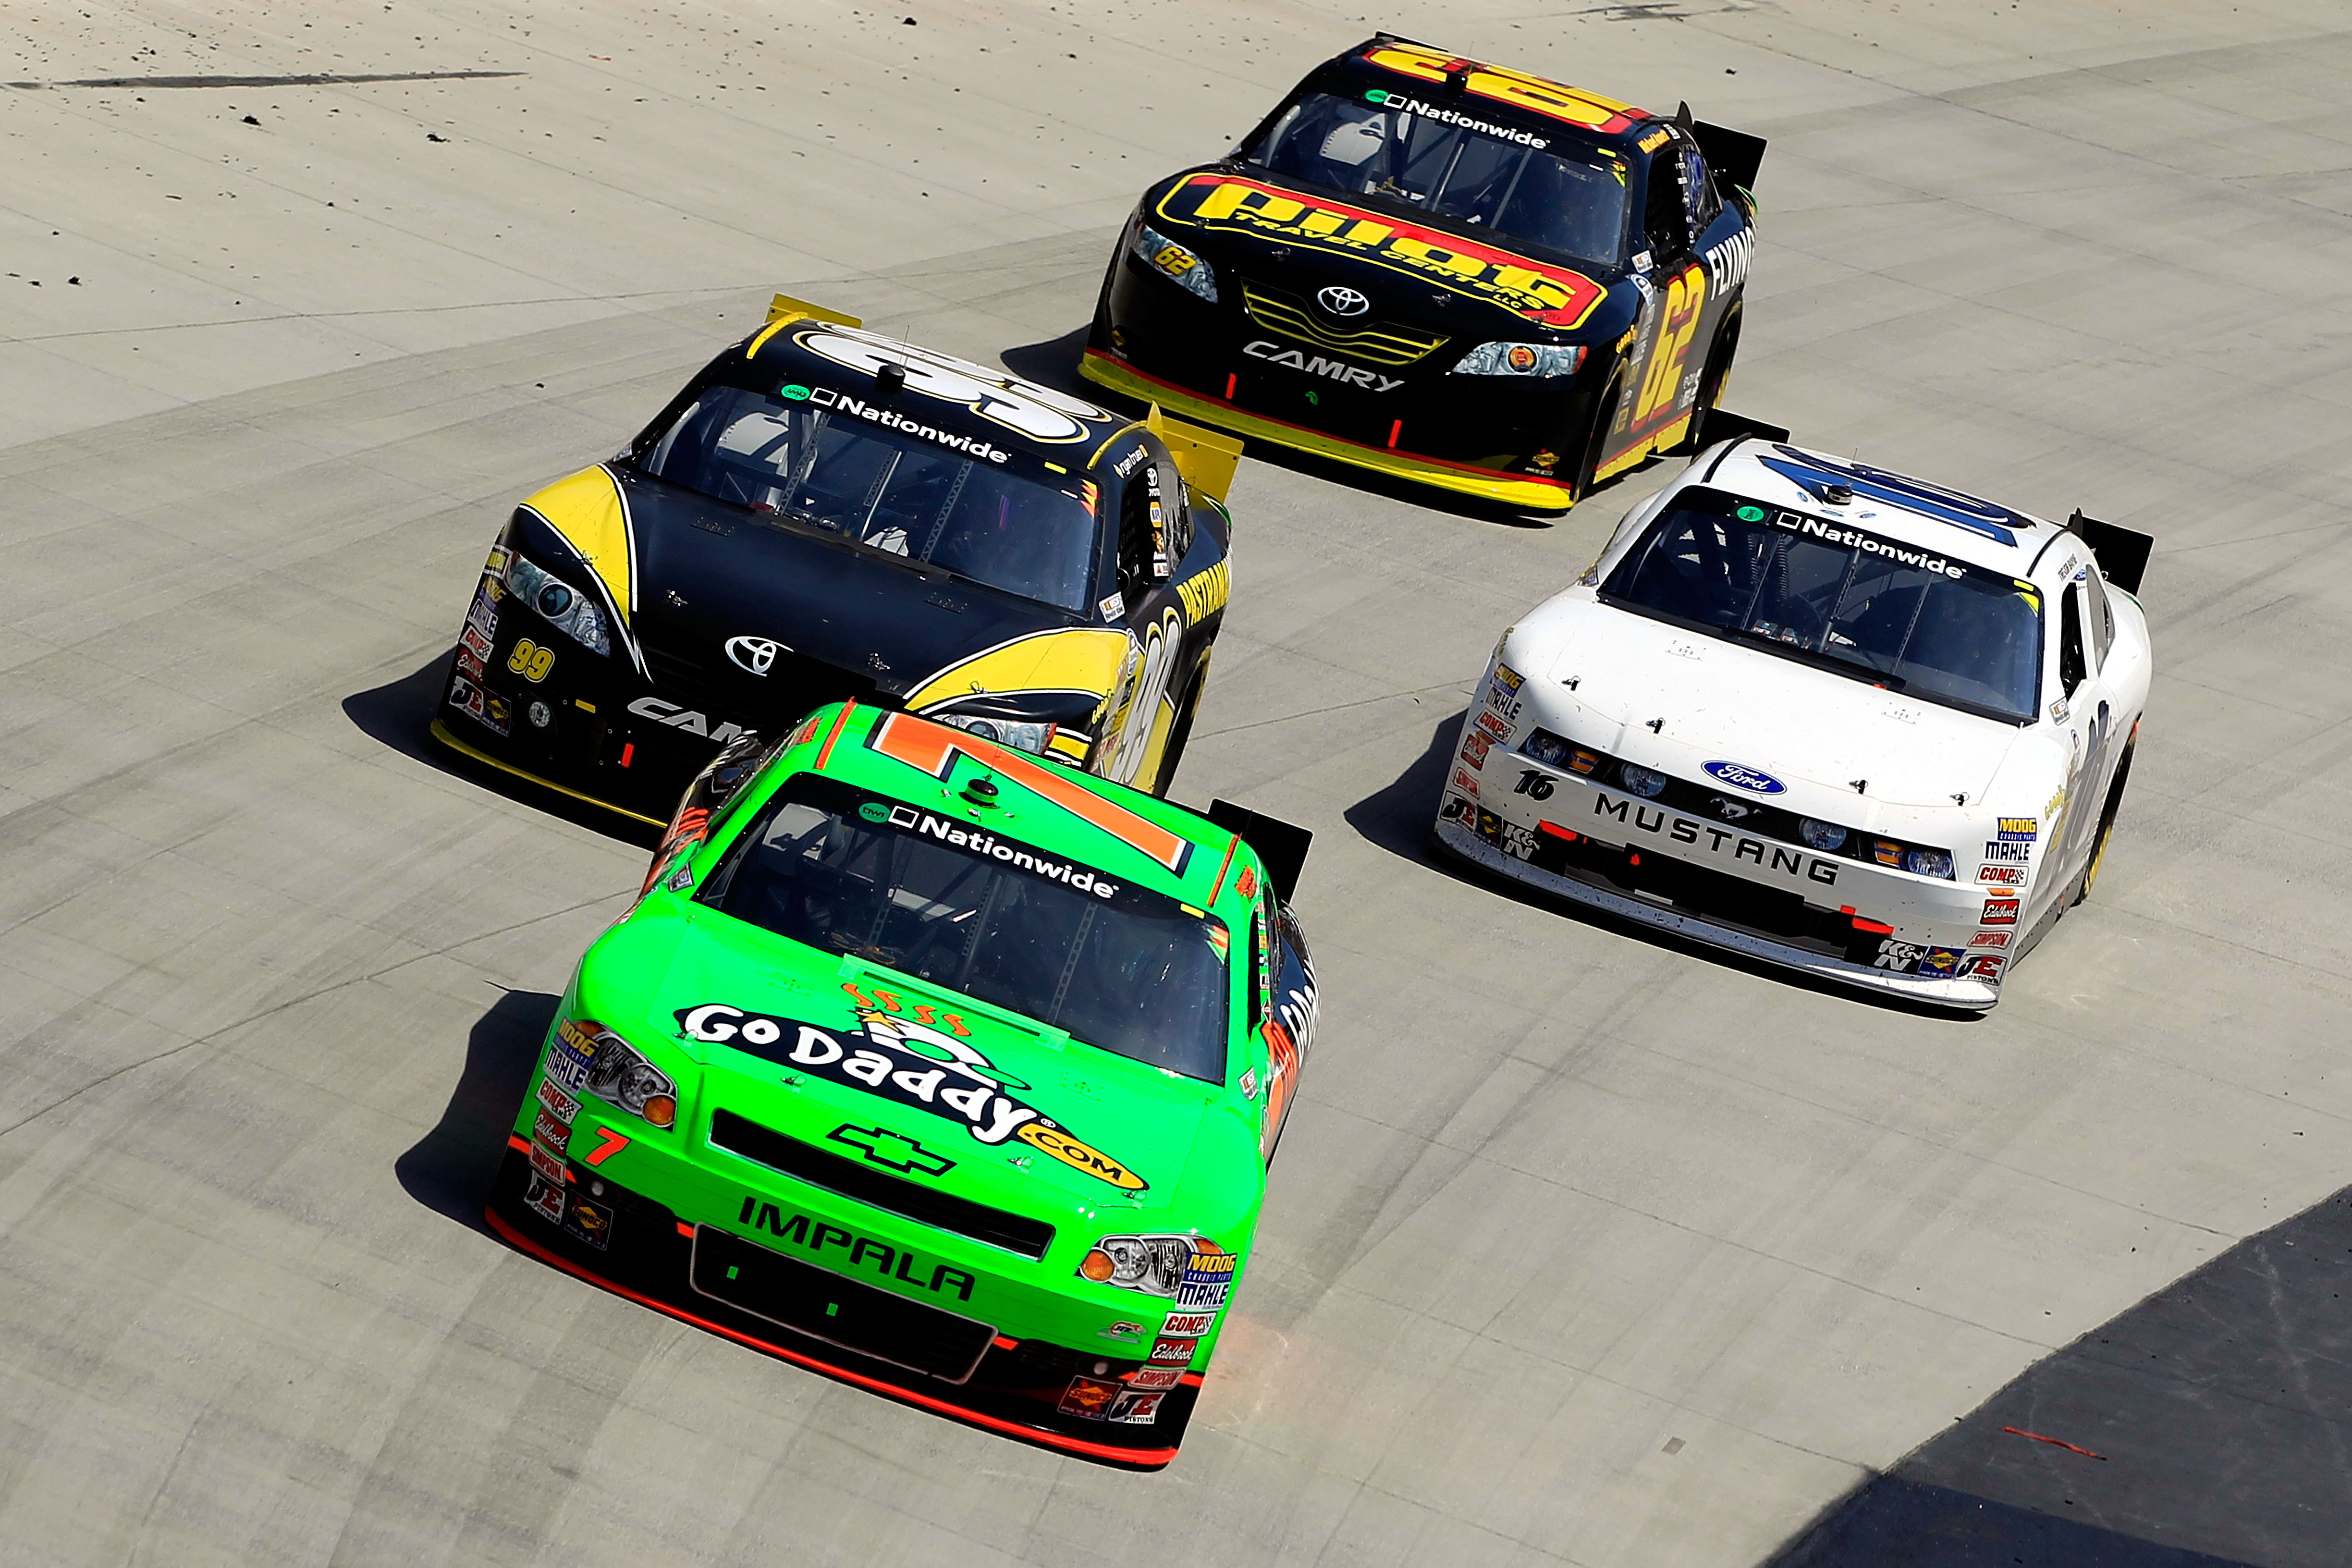 Danica Patrick is still a work in progress but she has met with limited success in 2011.